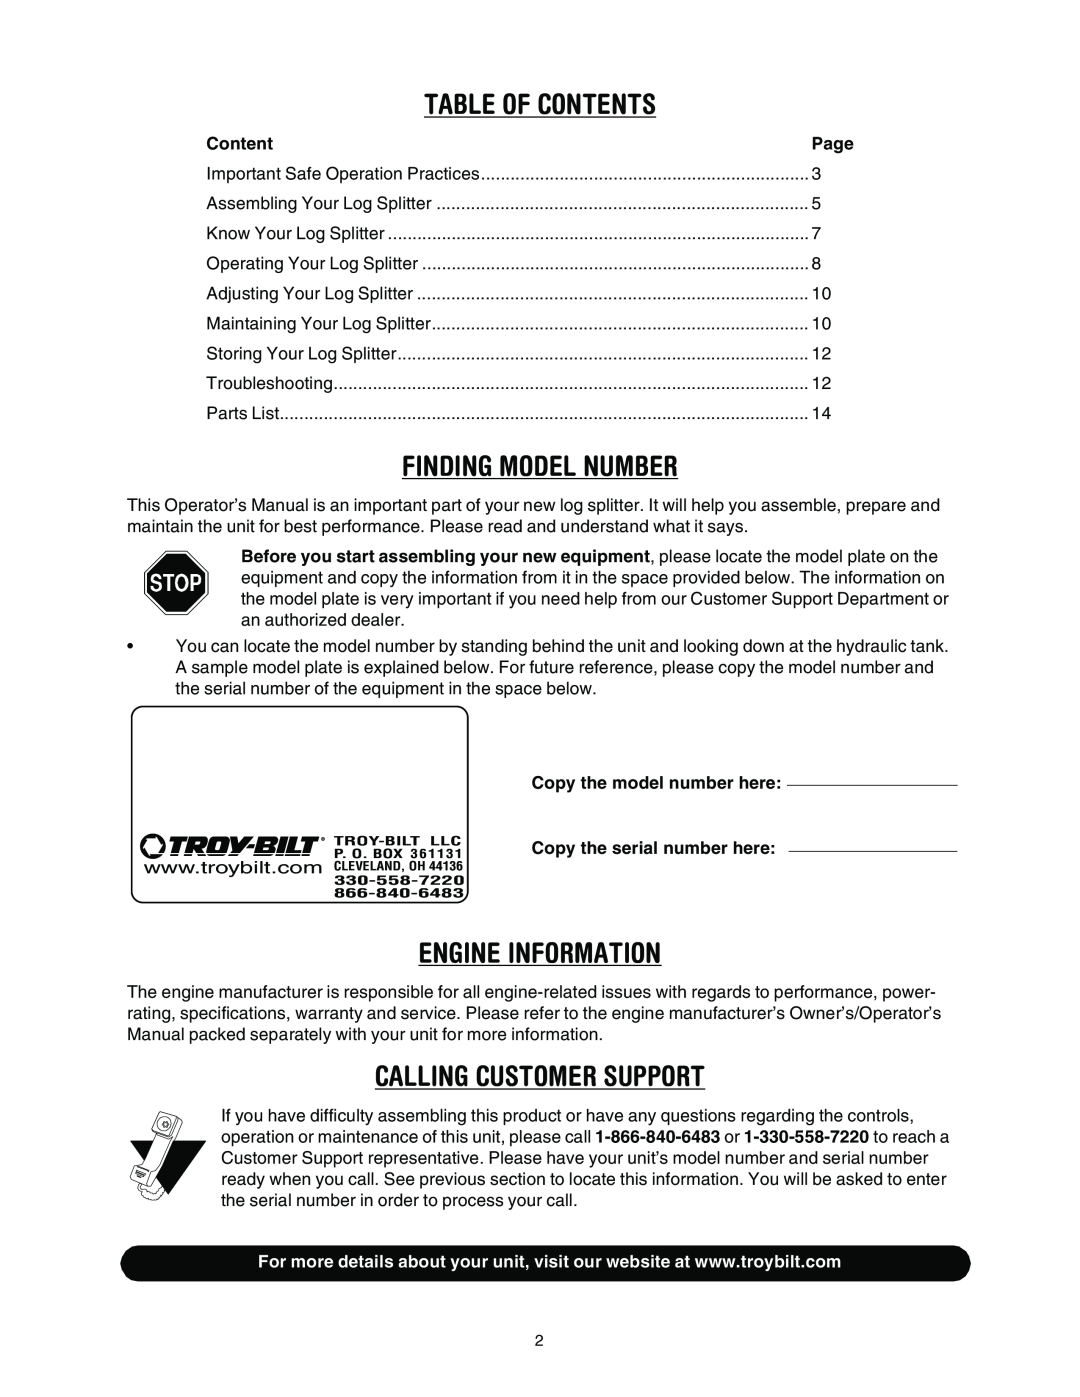 Troy-Bilt LS275 manual Table Of Contents, Finding Model Number, Engine Information, Calling Customer Support 